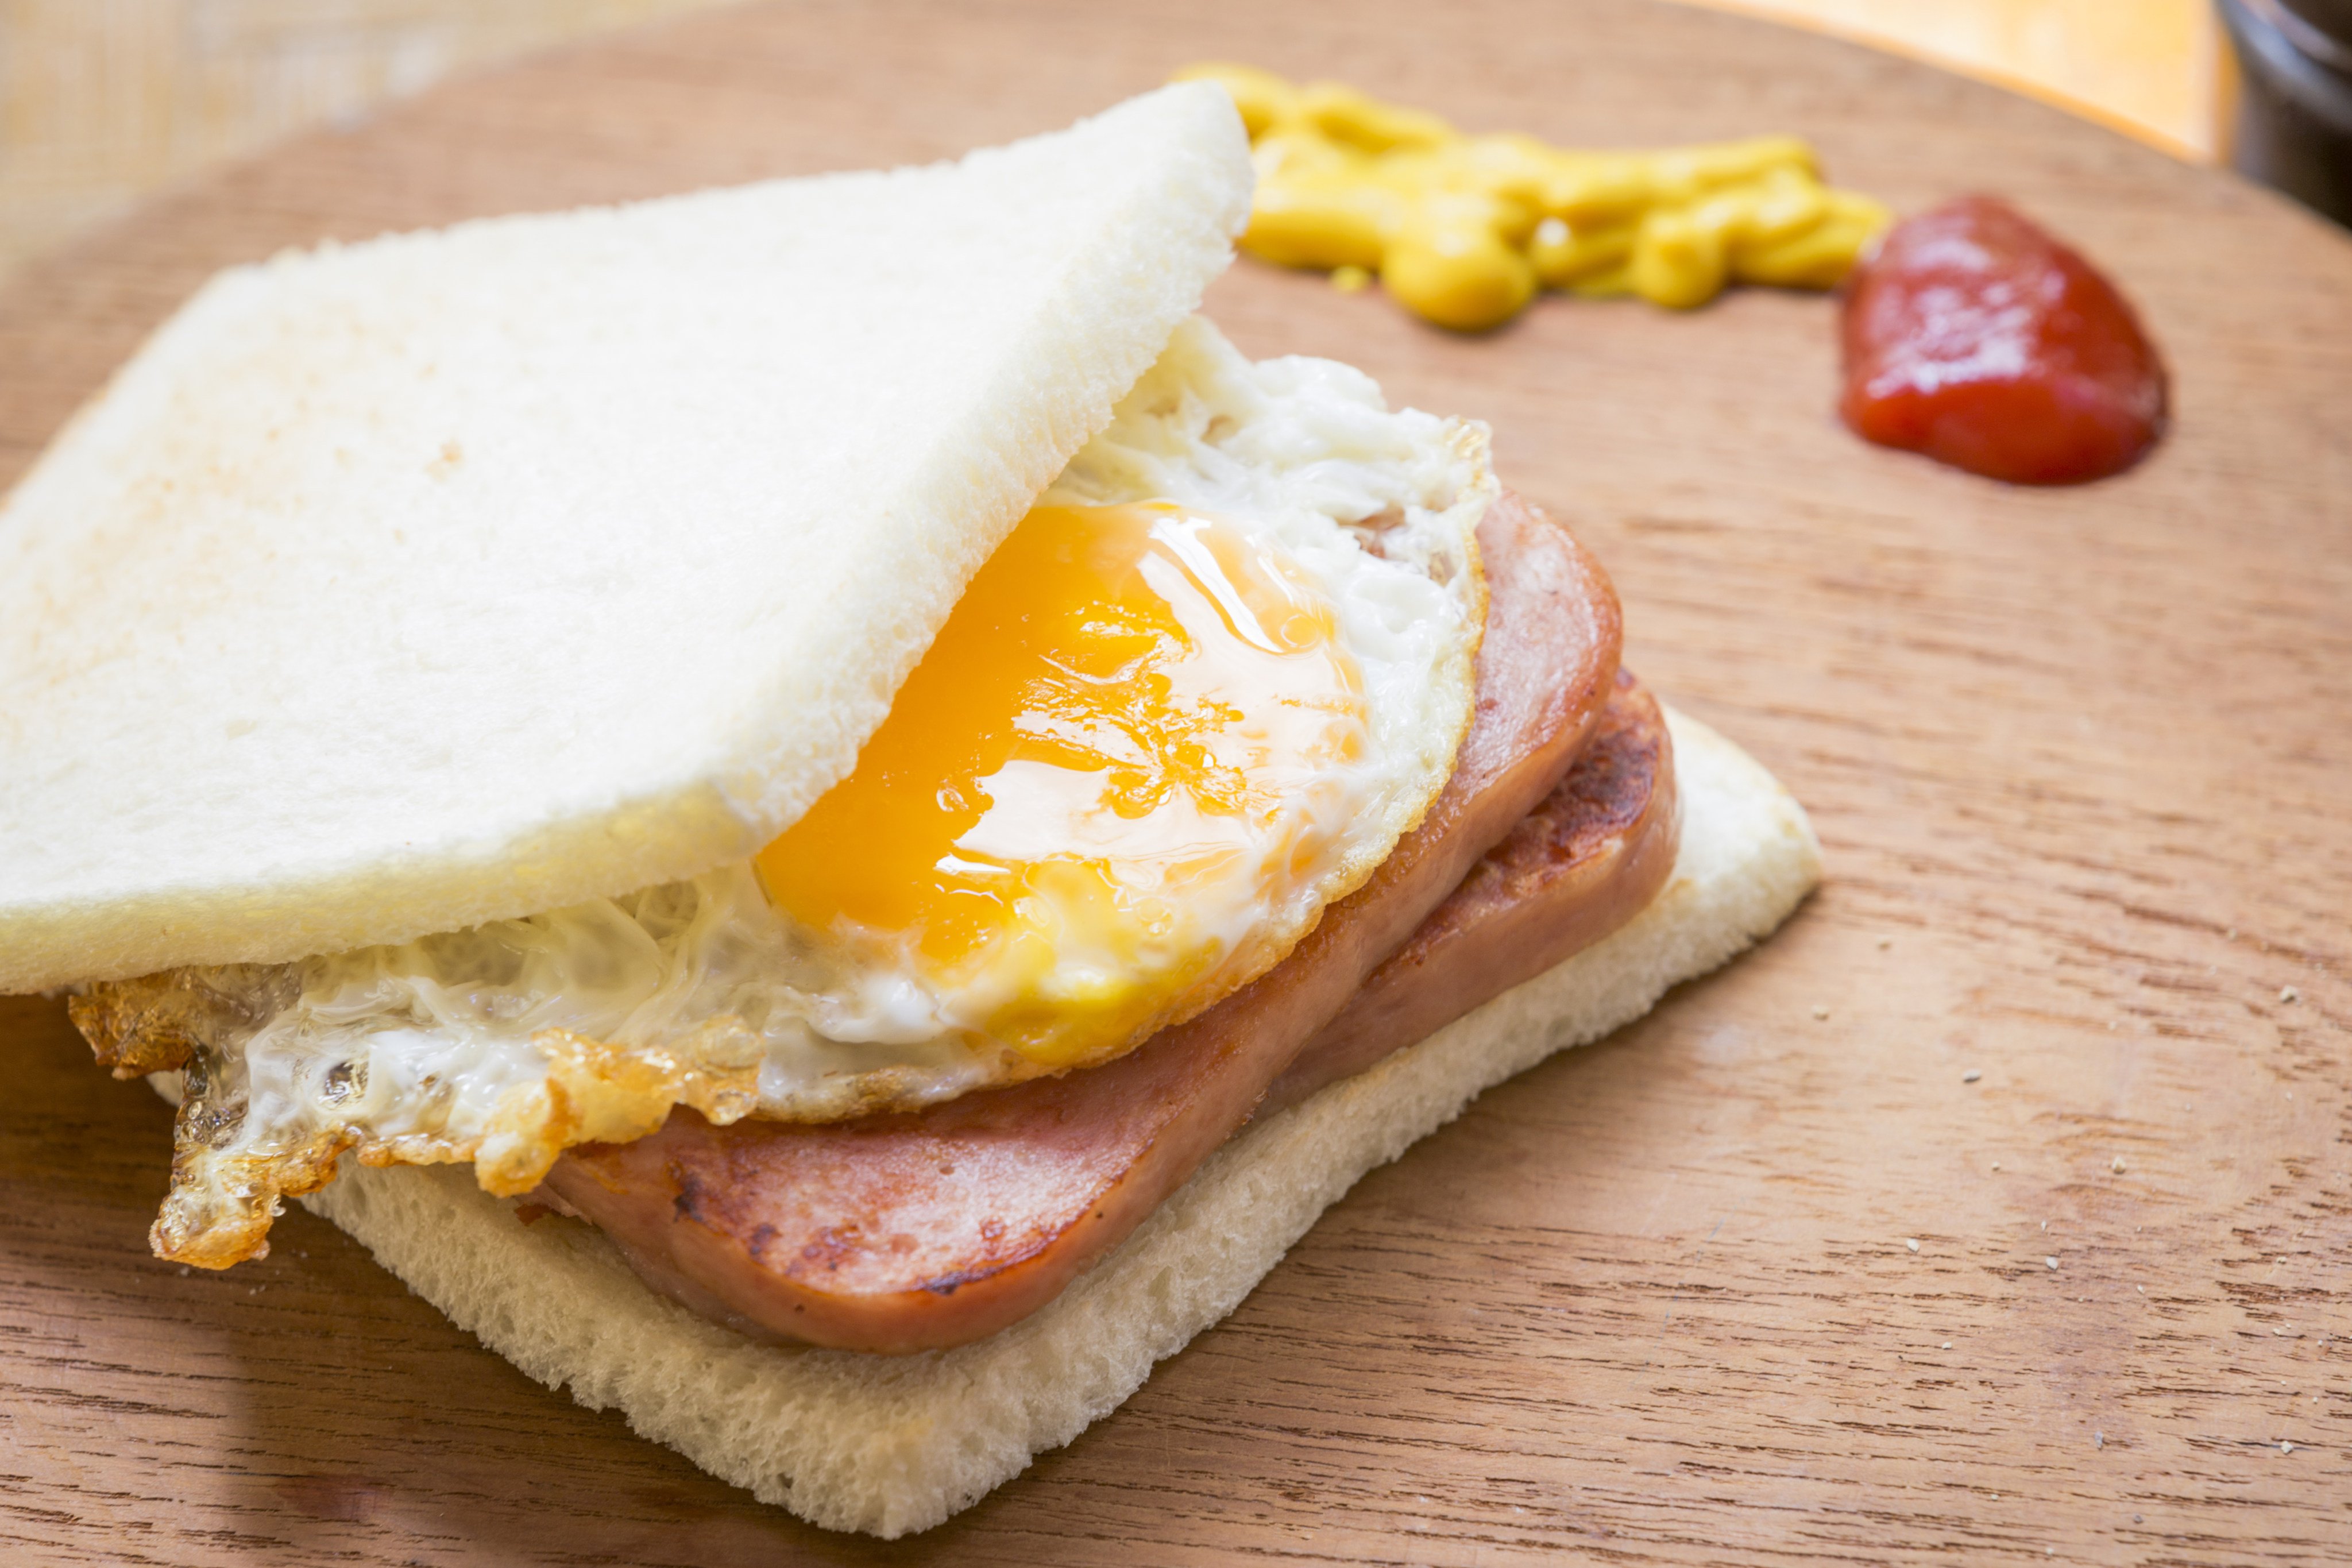 Spanish chef Jaime Ortola is a huge fan of spam and egg sandwiches. He reveals where he prefers to eat them in Hong Kong, and the restaurants he visits for dumplings, spicy Sichuan food, Italian, Middle Eastern, char siu pork, and more. Photo: Shutterstock